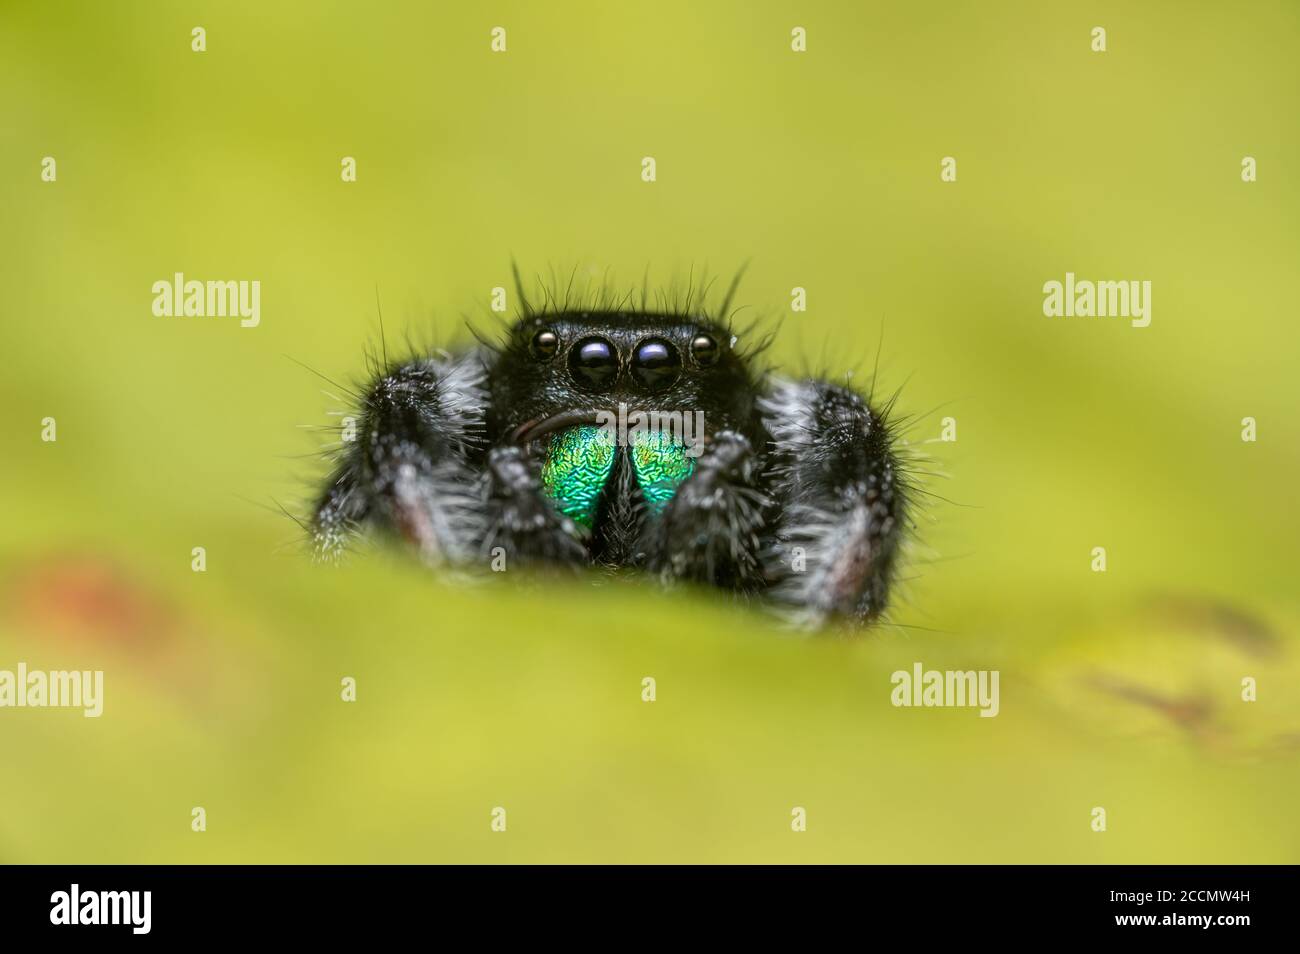 Male jumping spider (Phidippus regius) crawling on a dry leaf. Autumn warm colors, macro, sharp details. Beautiful huge eyes are looking at the camera Stock Photo